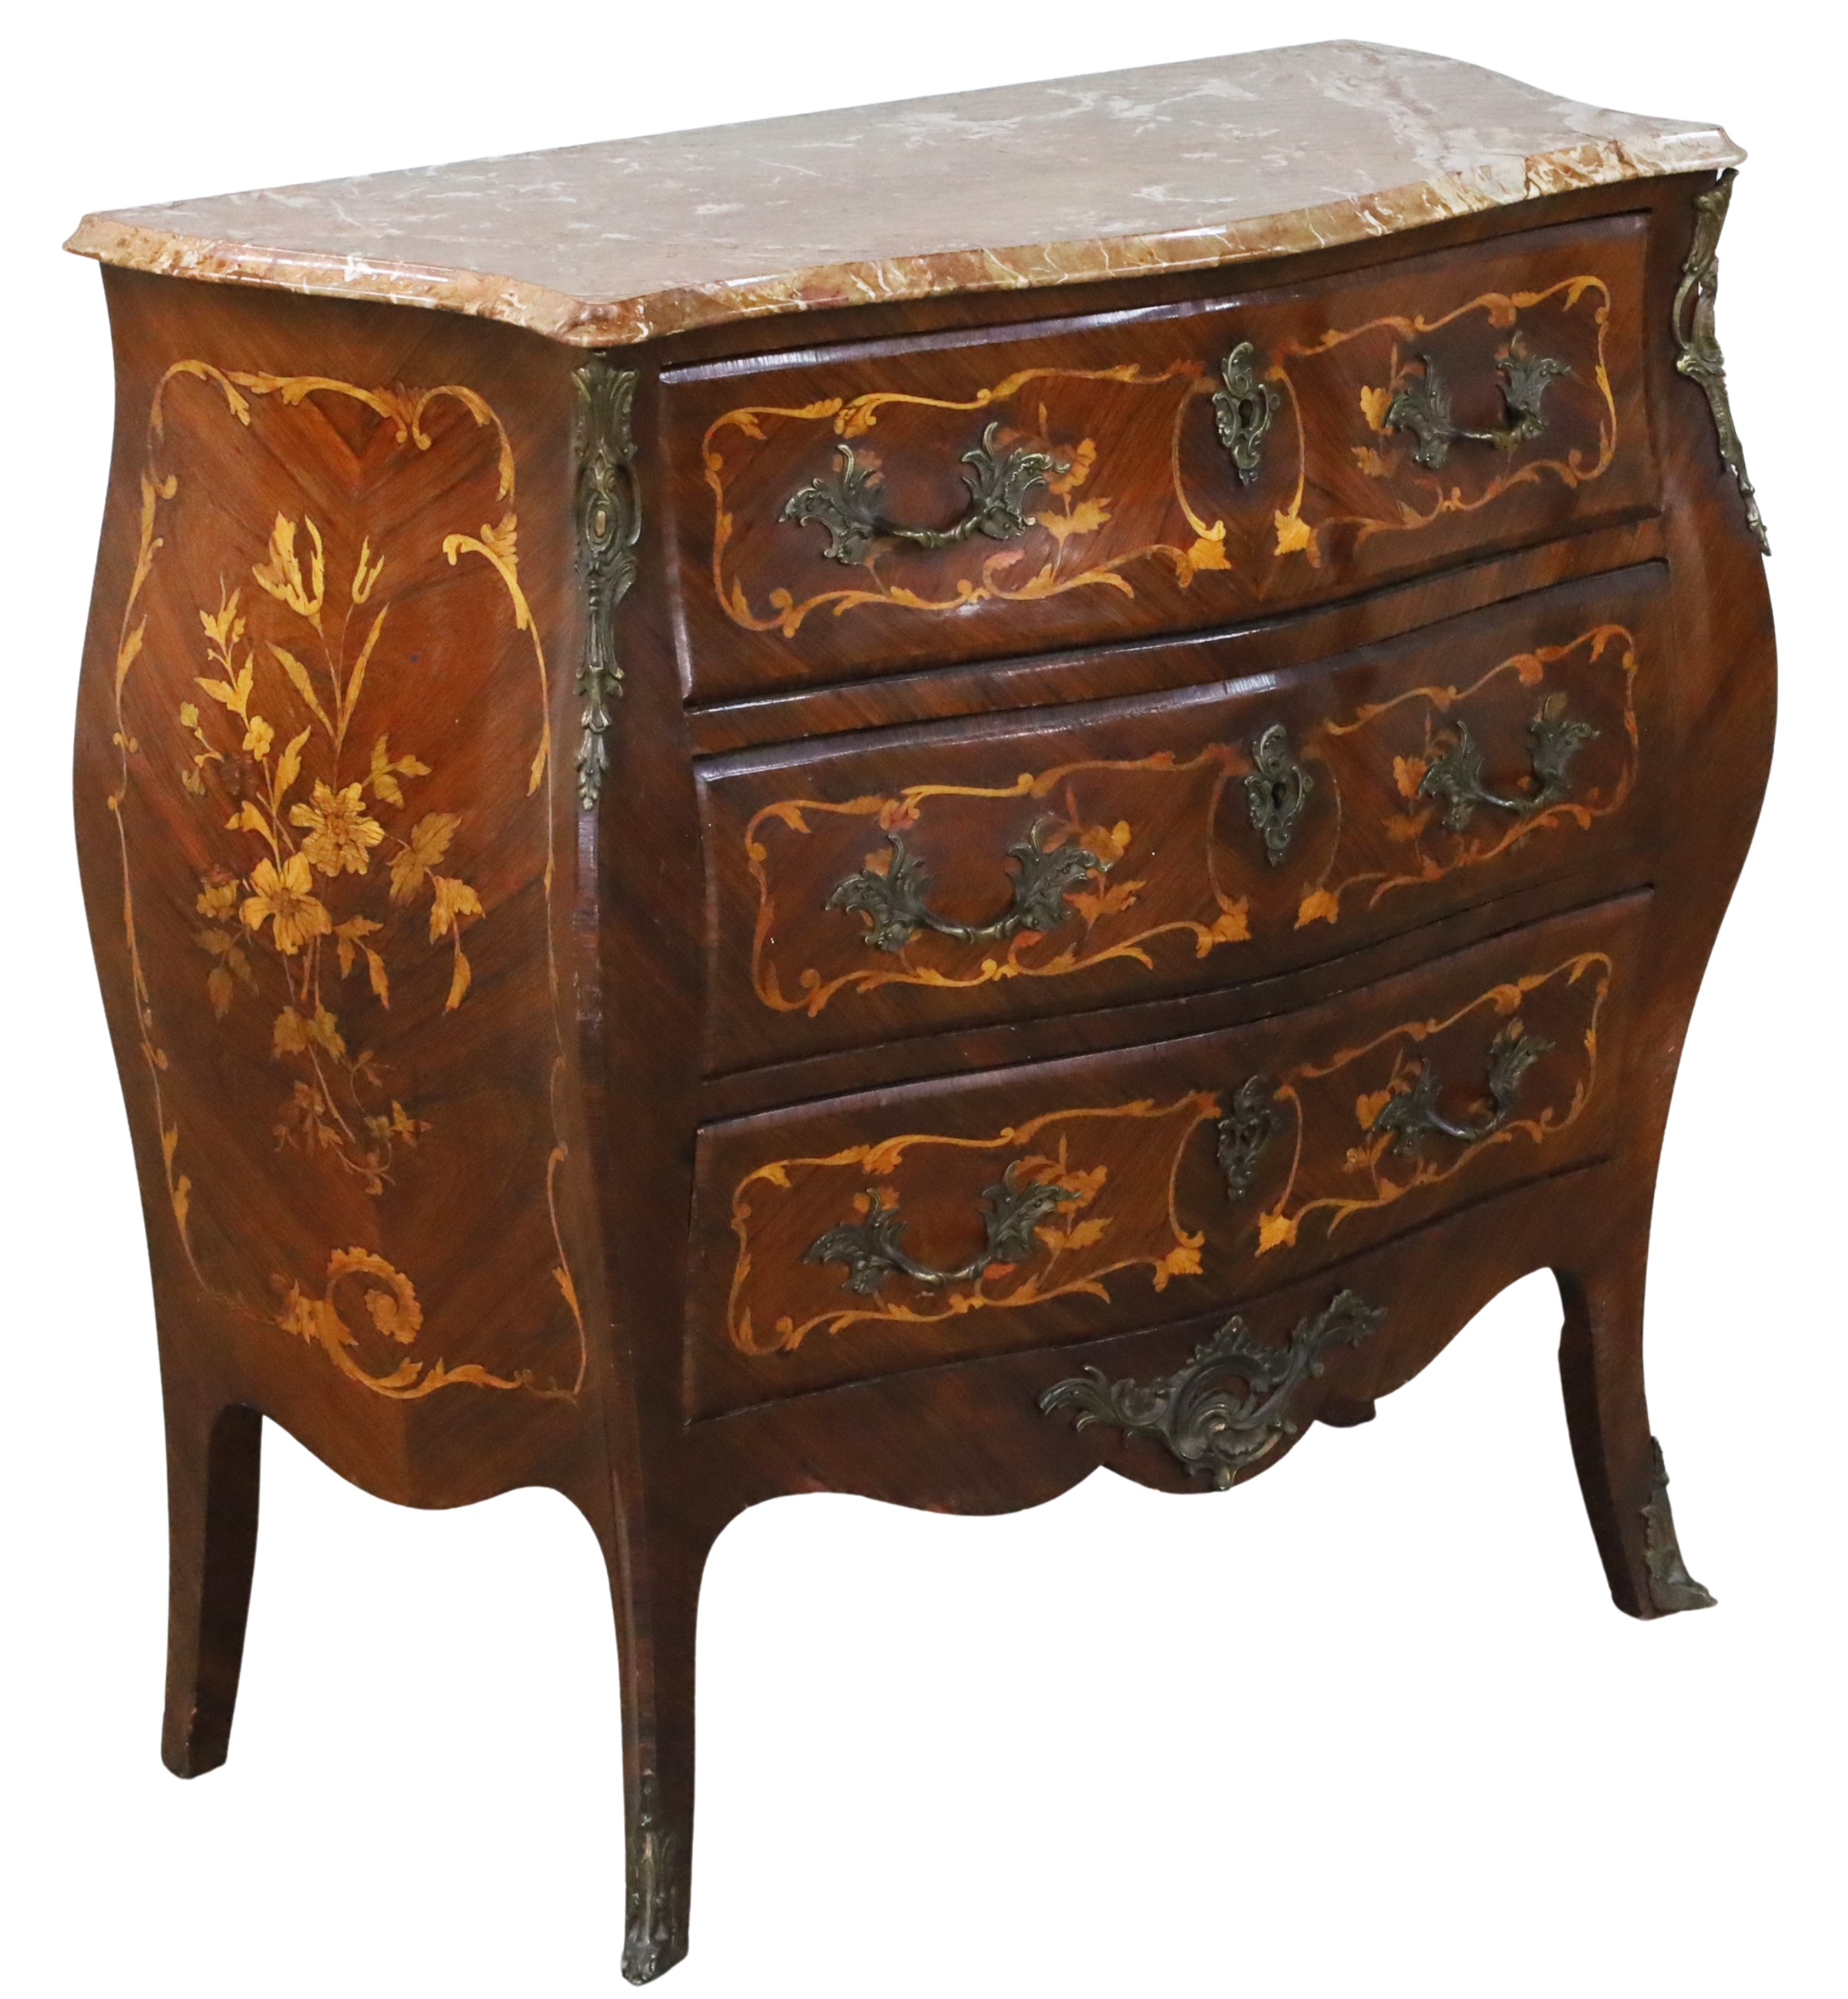 LOUIS XV STYLE KINGWOOD COMMODE 2f8c9a